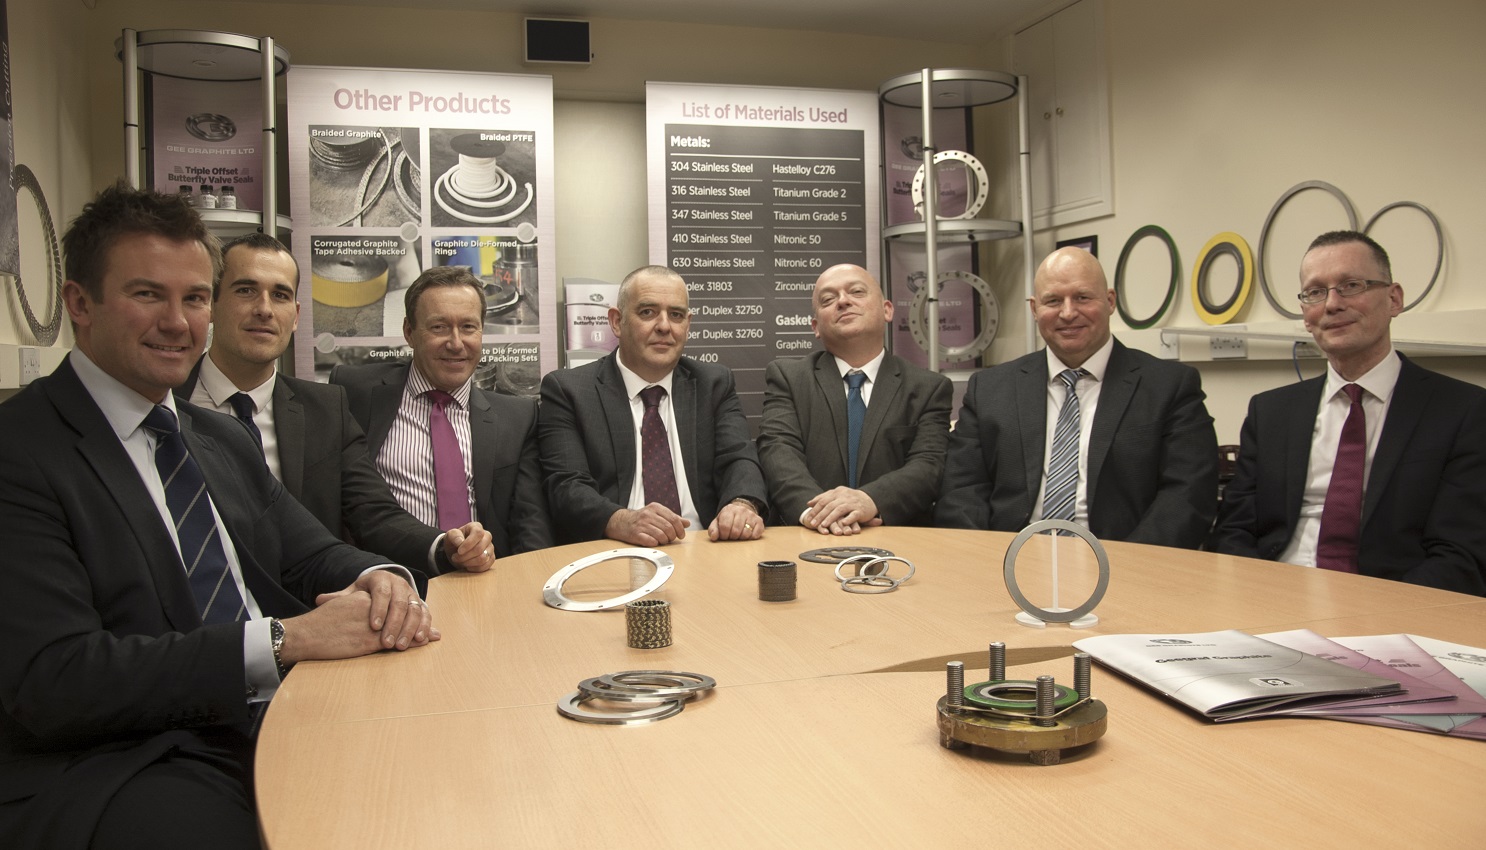 Seven suited men sitting around an oval table surrounded by industrial products on the table and point of sale behind them.